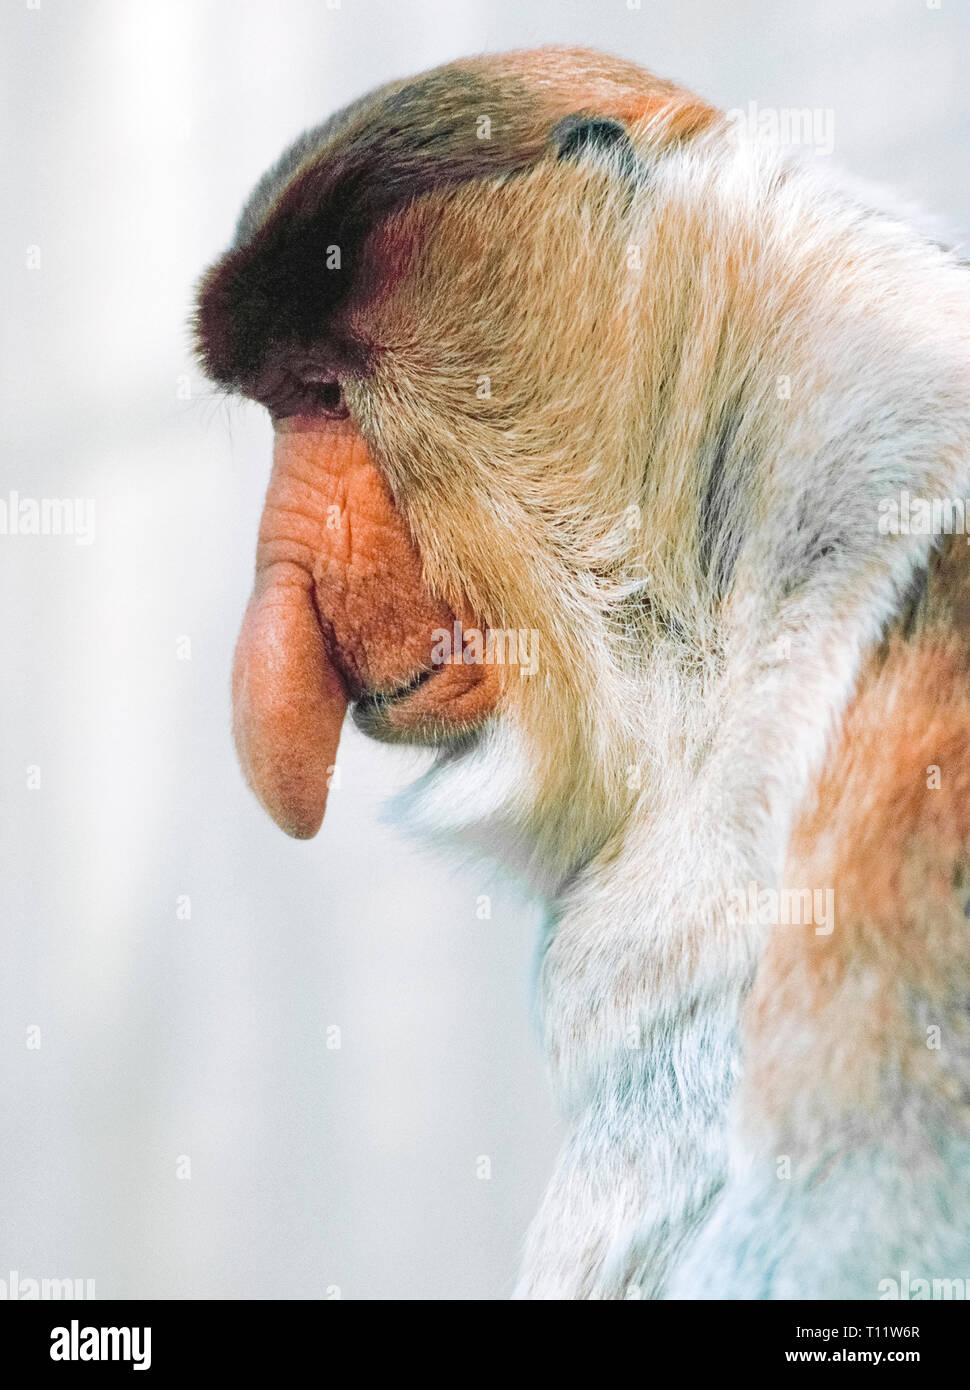 As this profile portrait shows, the proboscis monkey (Nasalis larvatus) is  unique among primates because of its long nose, which can measure up to 7  inches (18 centimeters) in males. The male